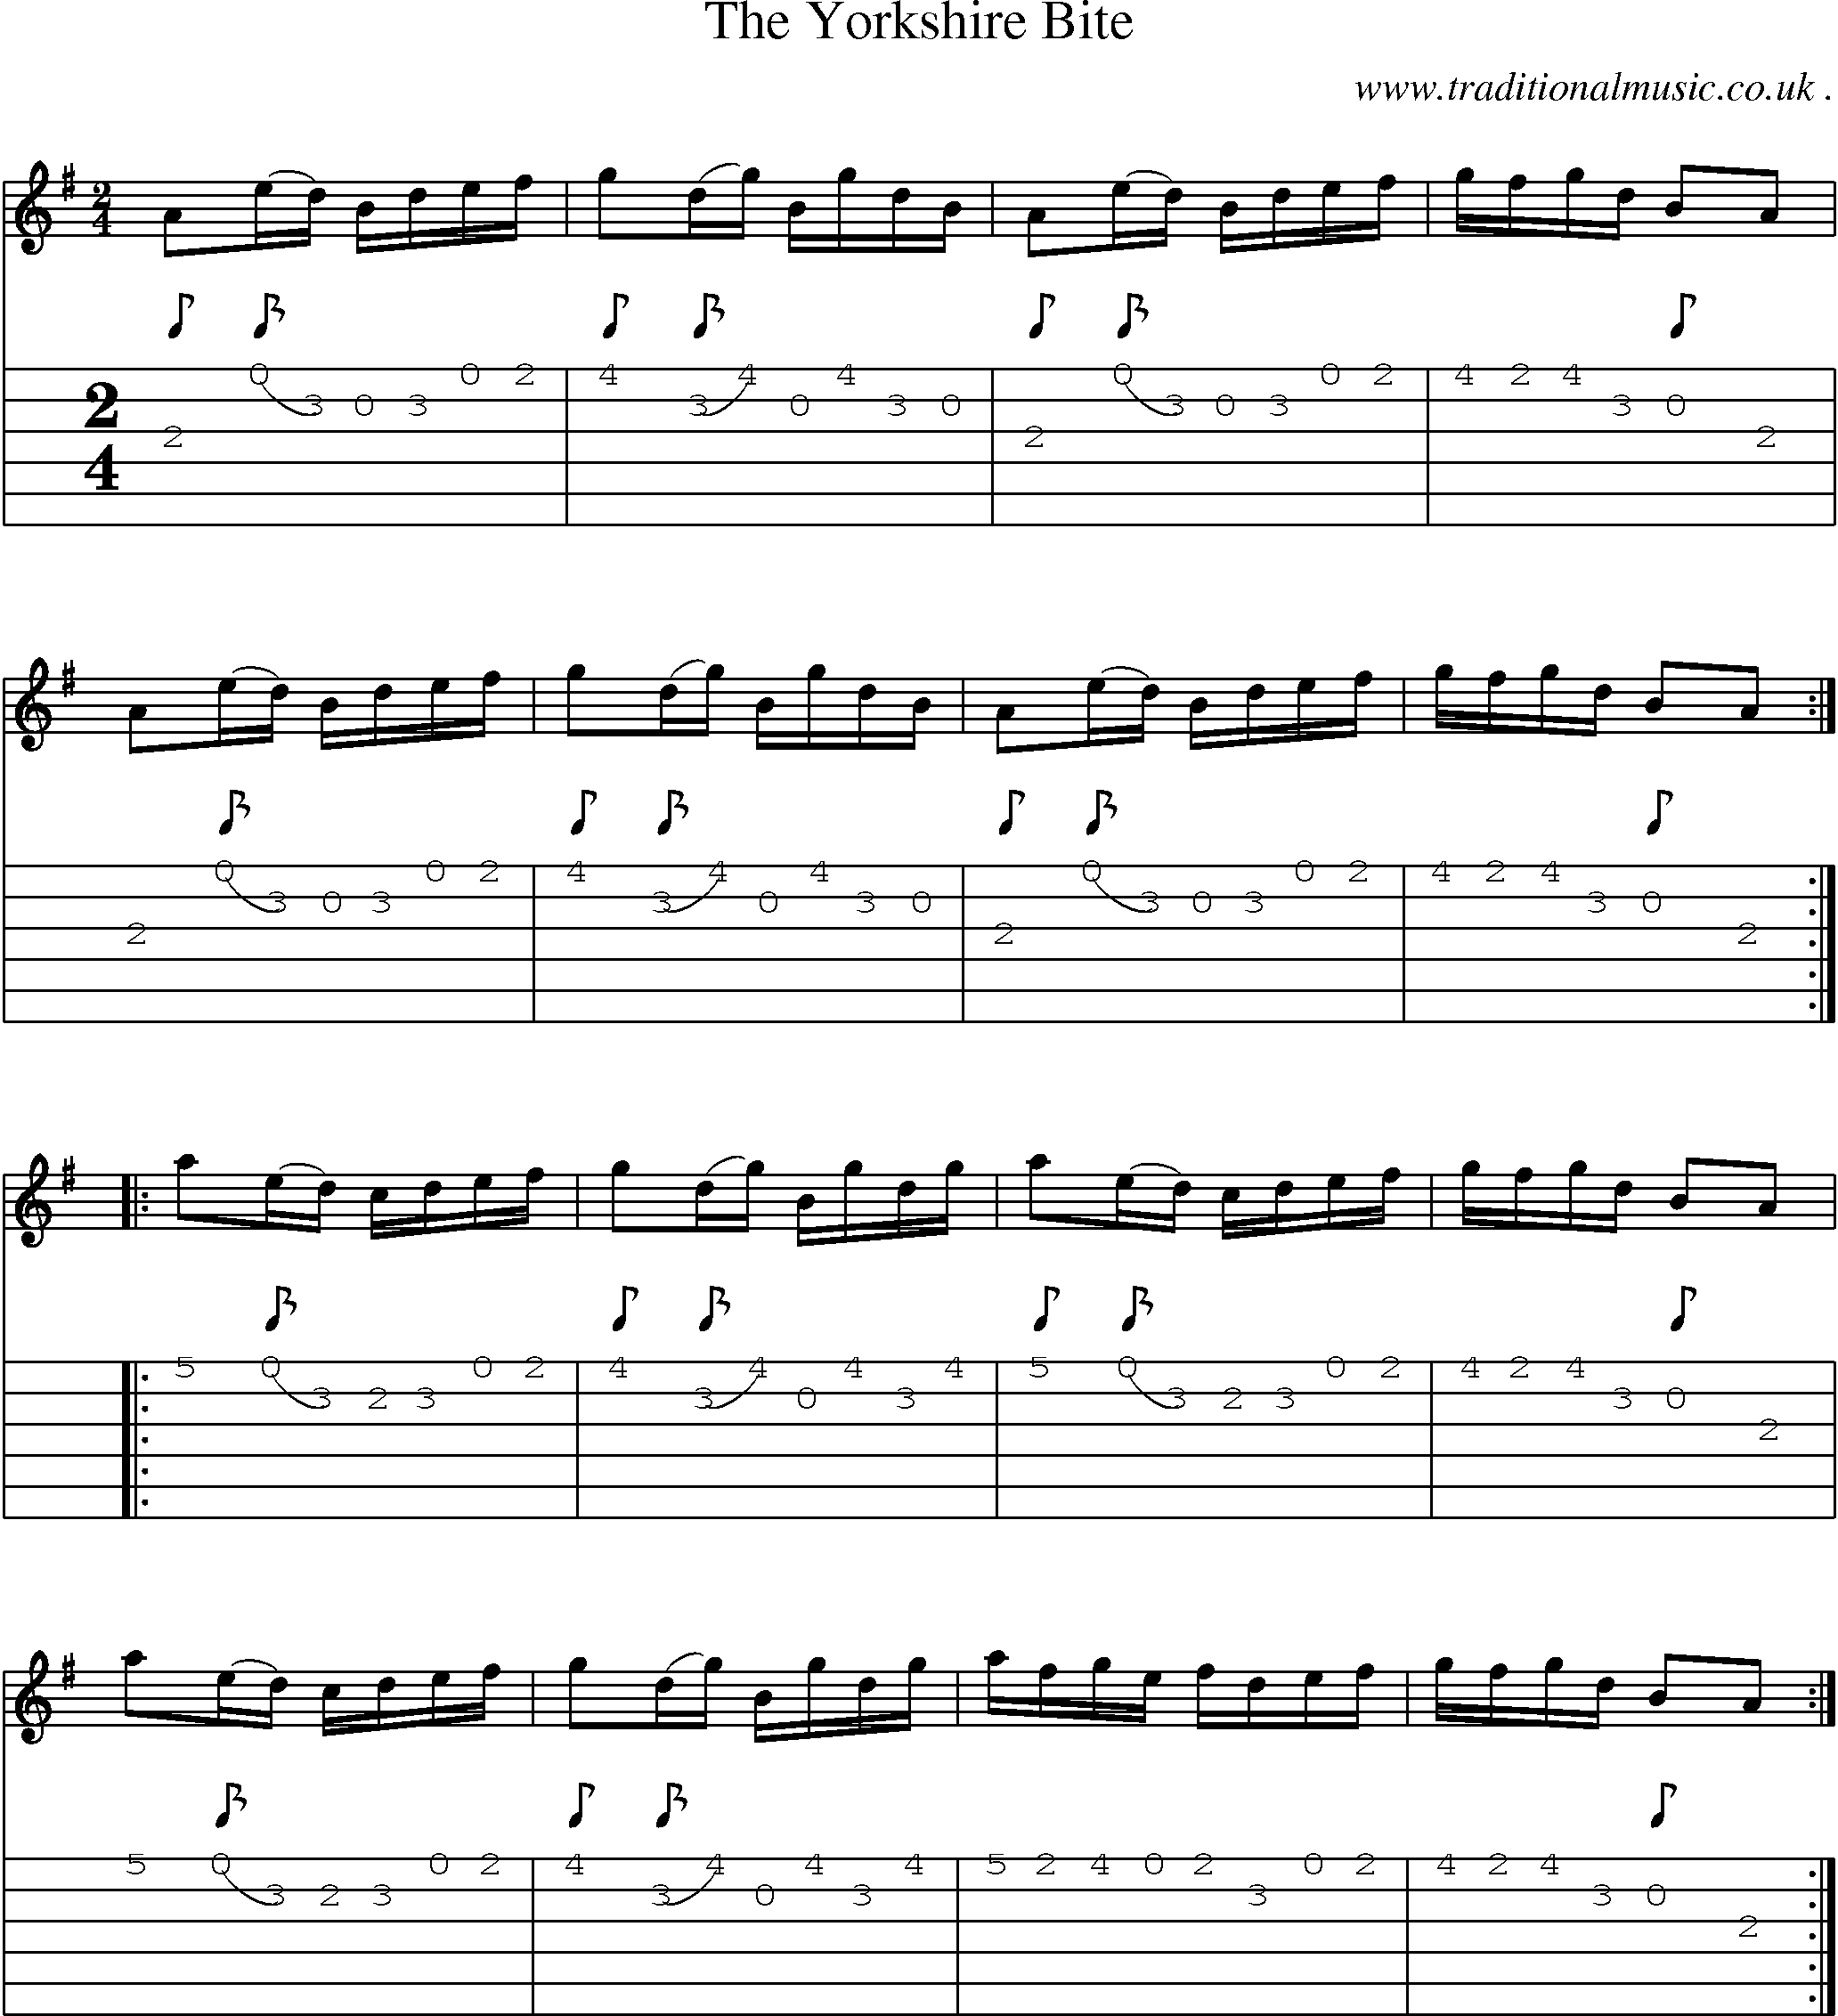 Sheet-Music and Guitar Tabs for The Yorkshire Bite